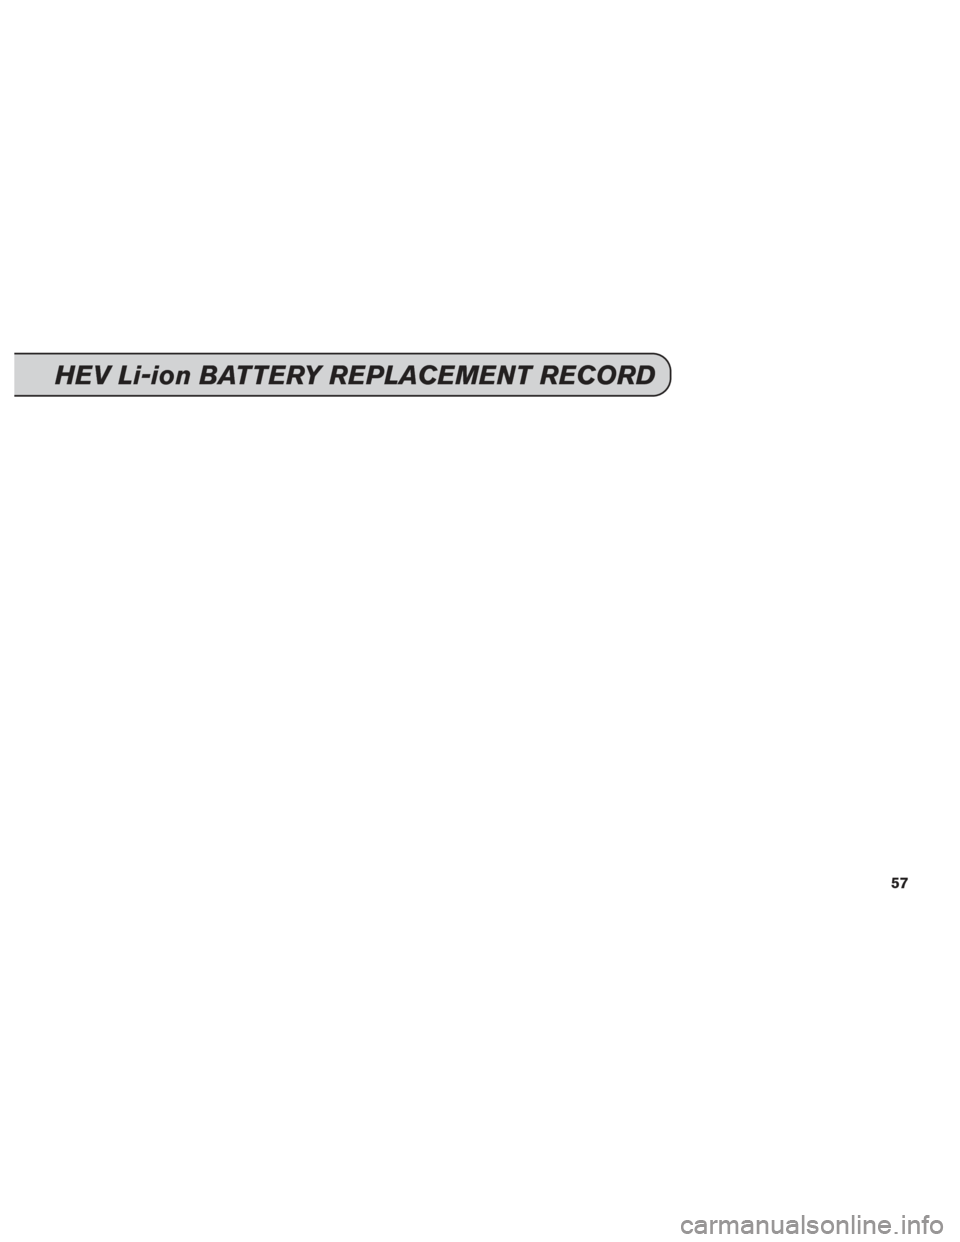 NISSAN TITAN 2014 1.G Service And Maintenance Guide HEV Li-ion BATTERY REPLACEMENT RECORD
57 